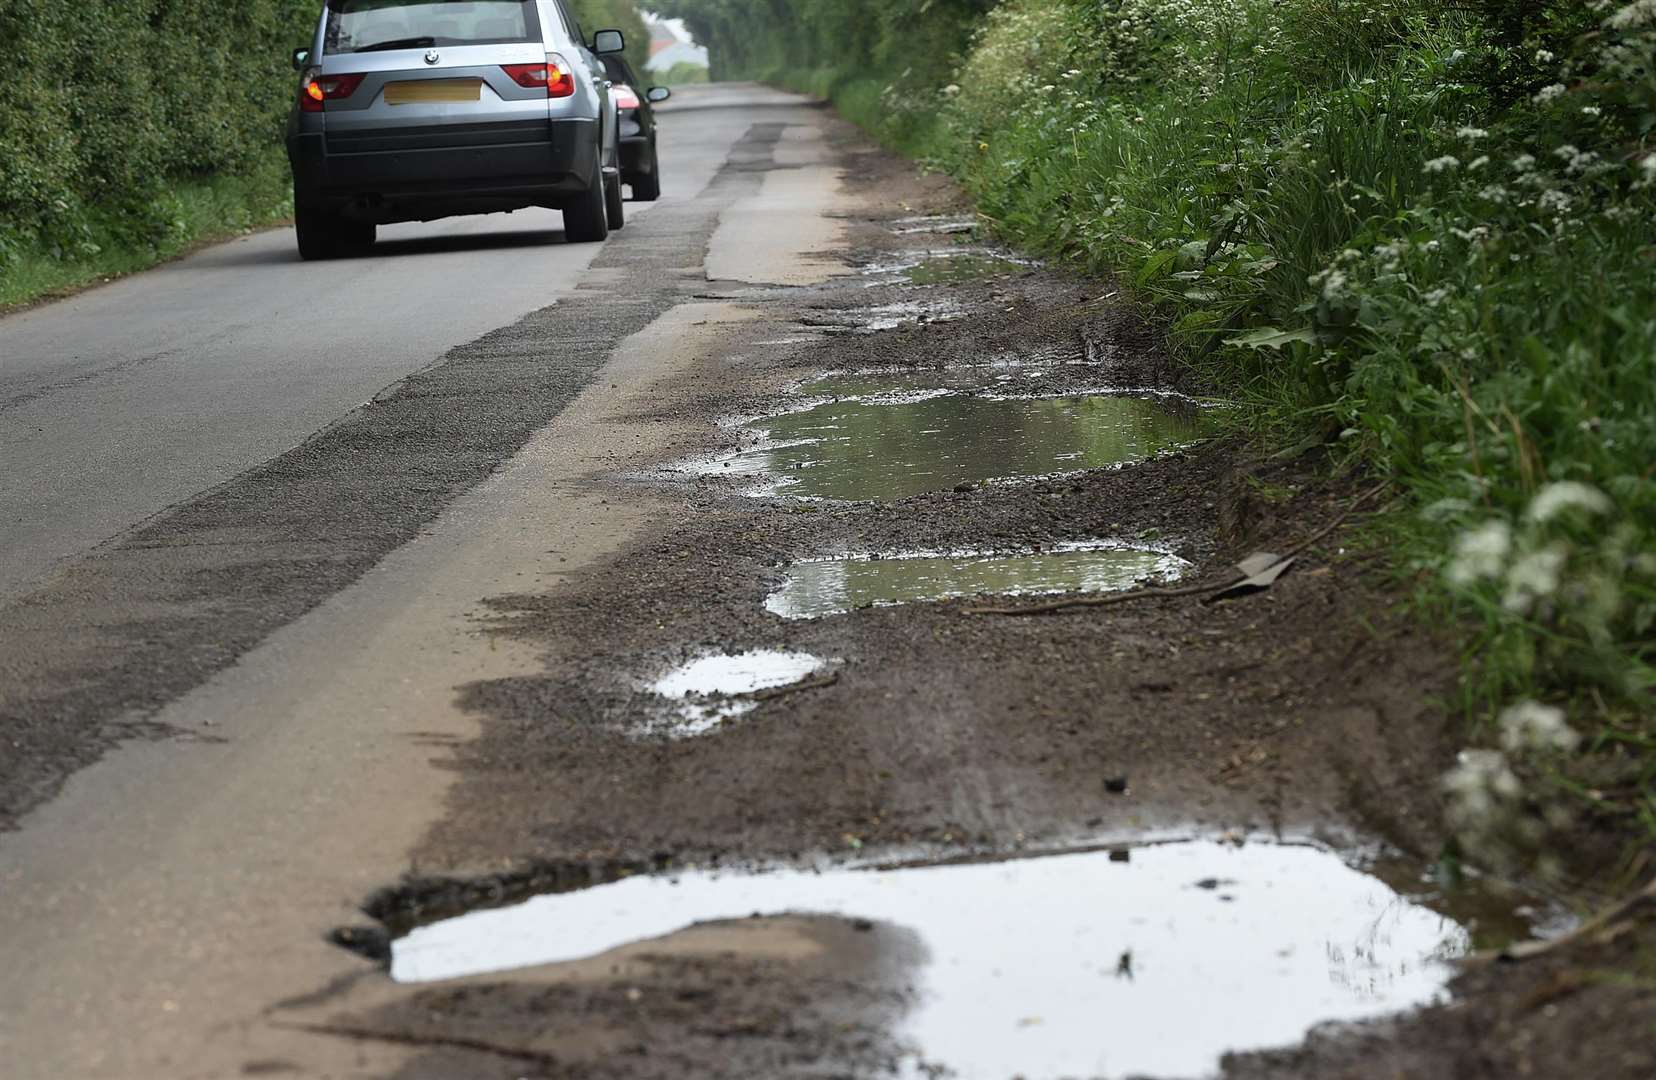 Officials say there is a £630 million backlog of repairs needed to roads across Kent